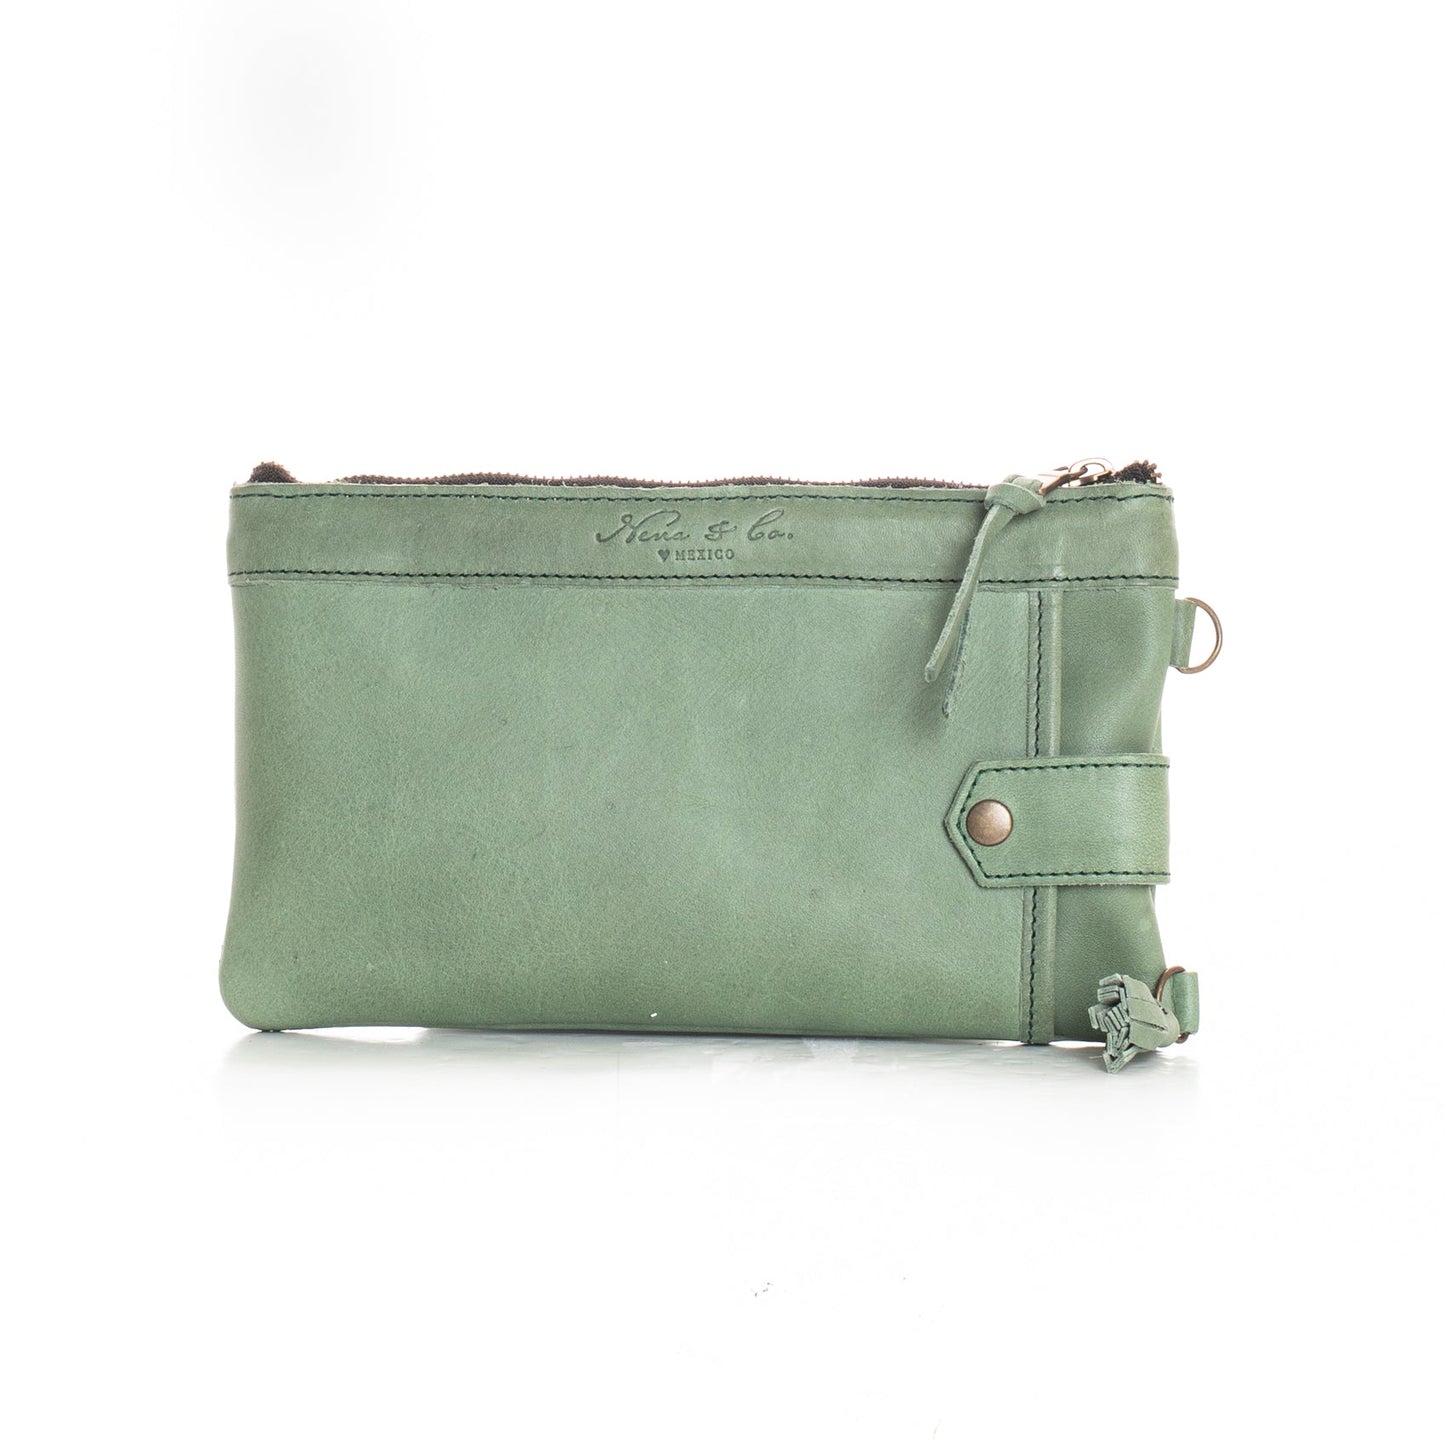 EVERYTHING CLUTCH - MEXICO COLLECTION - FULL LEATHER - JADE